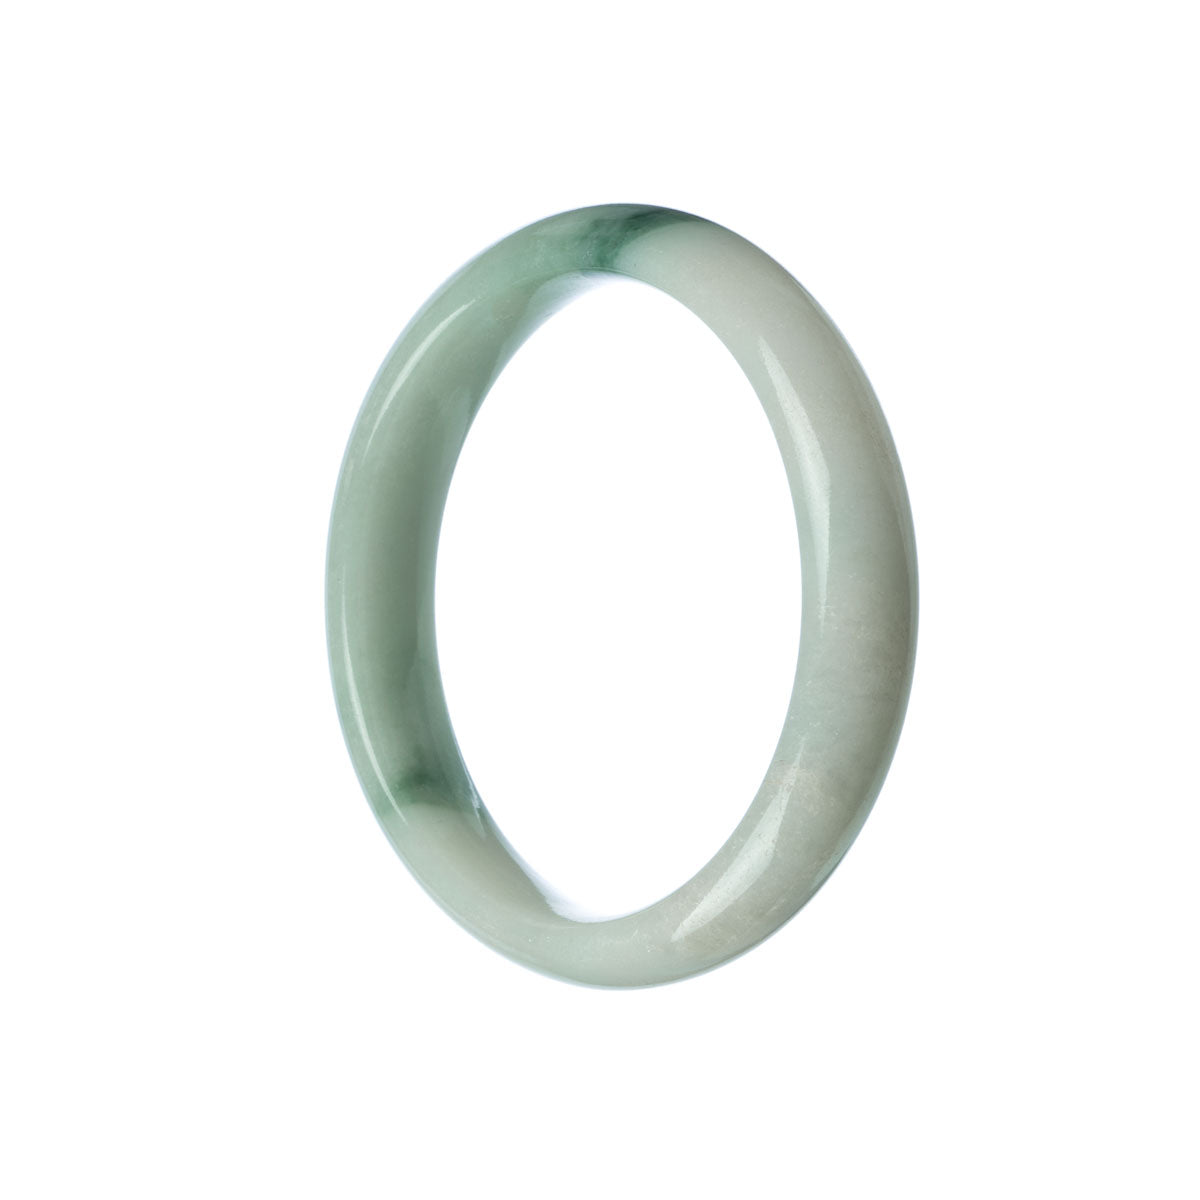 A close-up image of a beautiful white jadeite bracelet with a half moon shape, crafted from genuine Grade A jadeite. Perfect for adding elegance and style to any outfit.